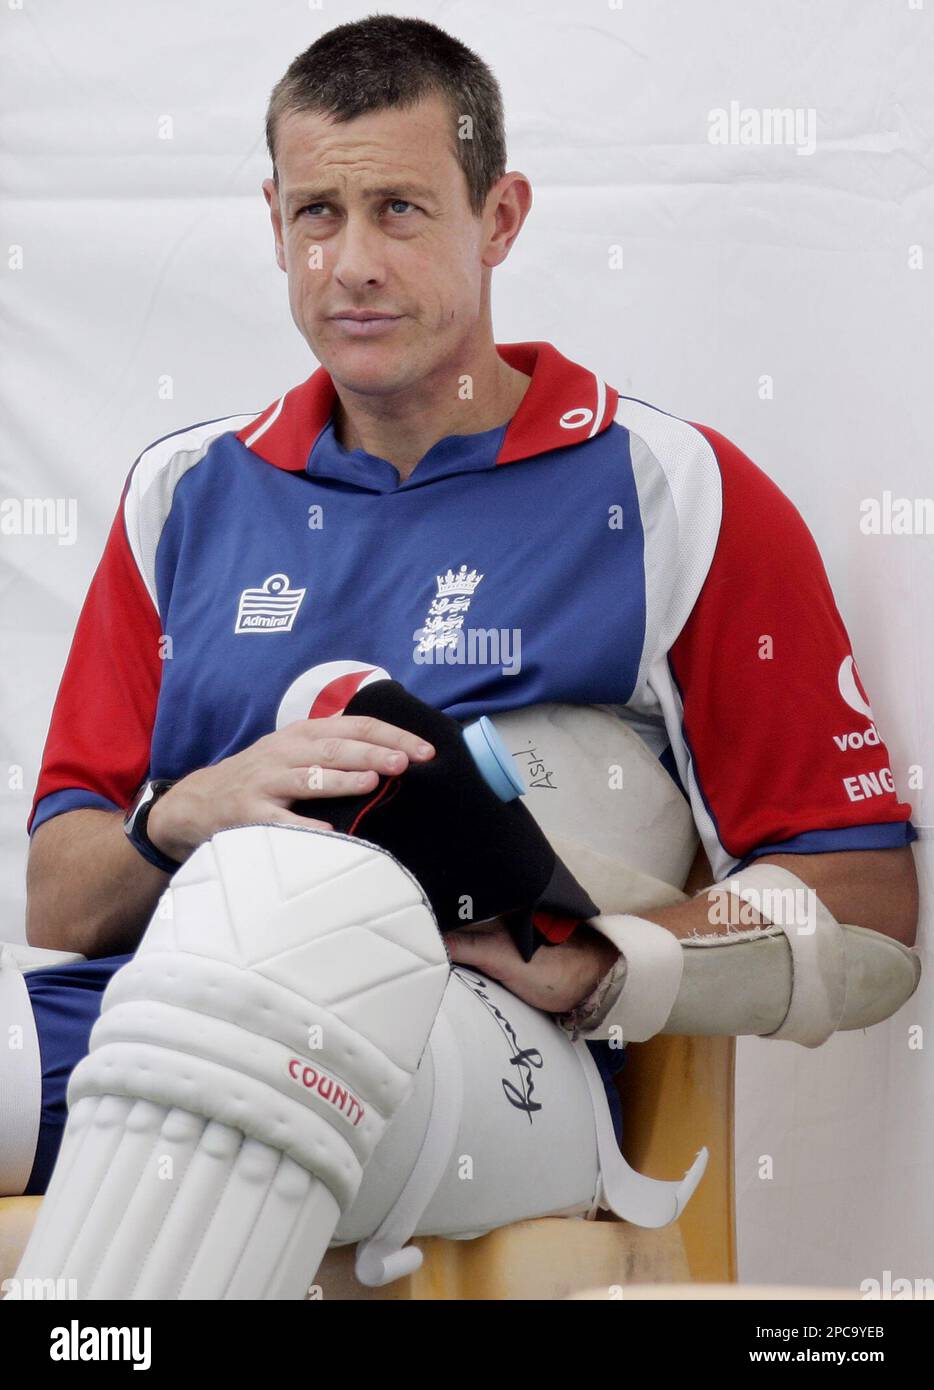 England spin bowler Ashley Giles holds a ice pack on his hand after injuring his fingers during a net session on the eve of the first cricket test against Australia at the